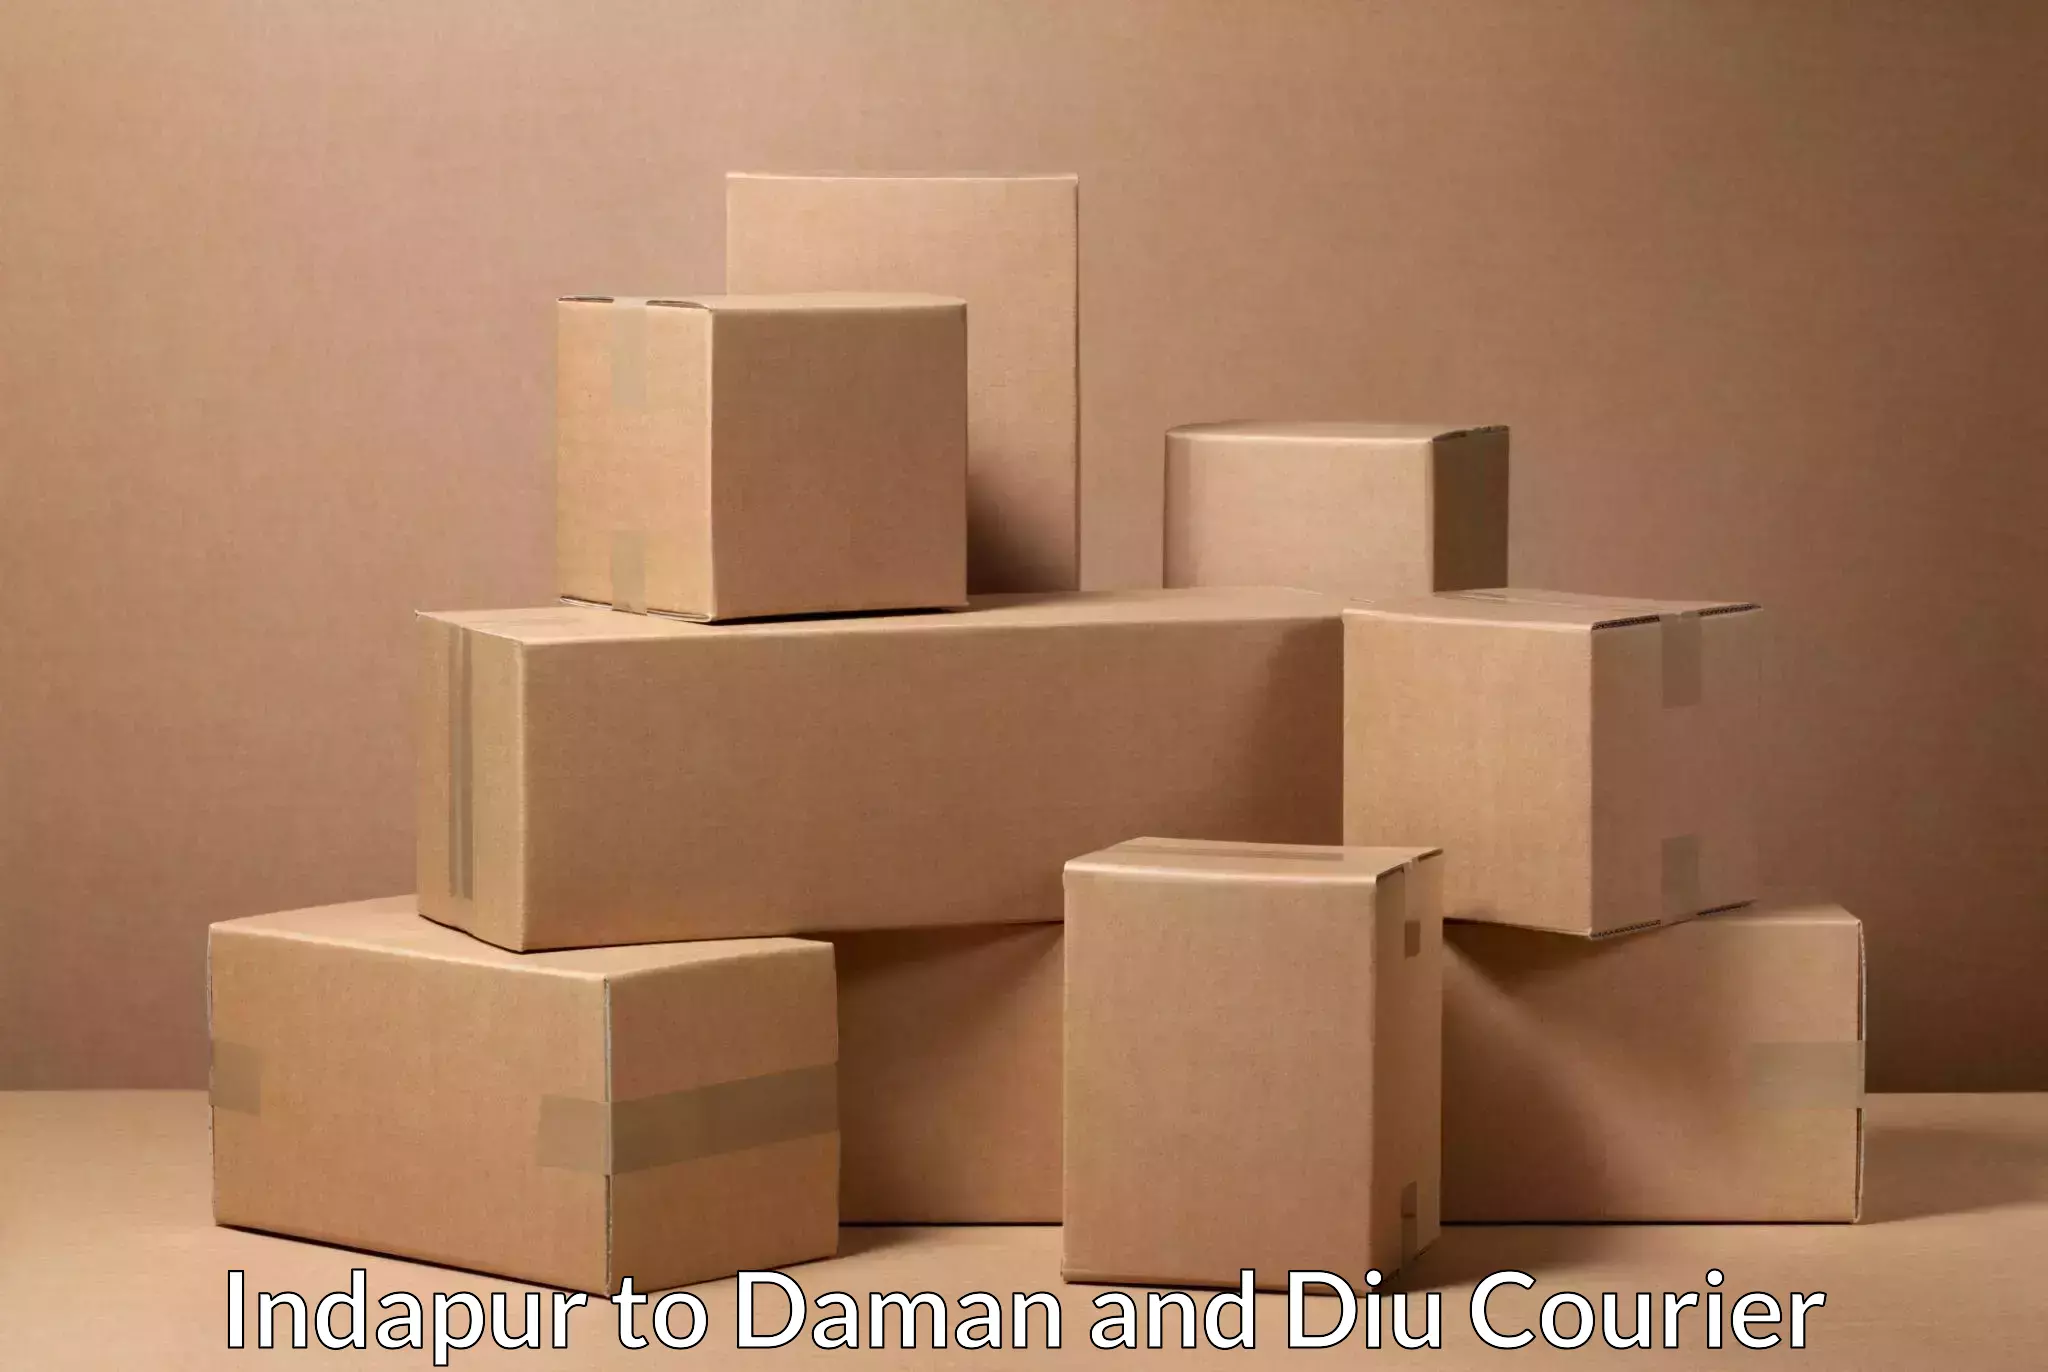 Reliable courier service Indapur to Daman and Diu